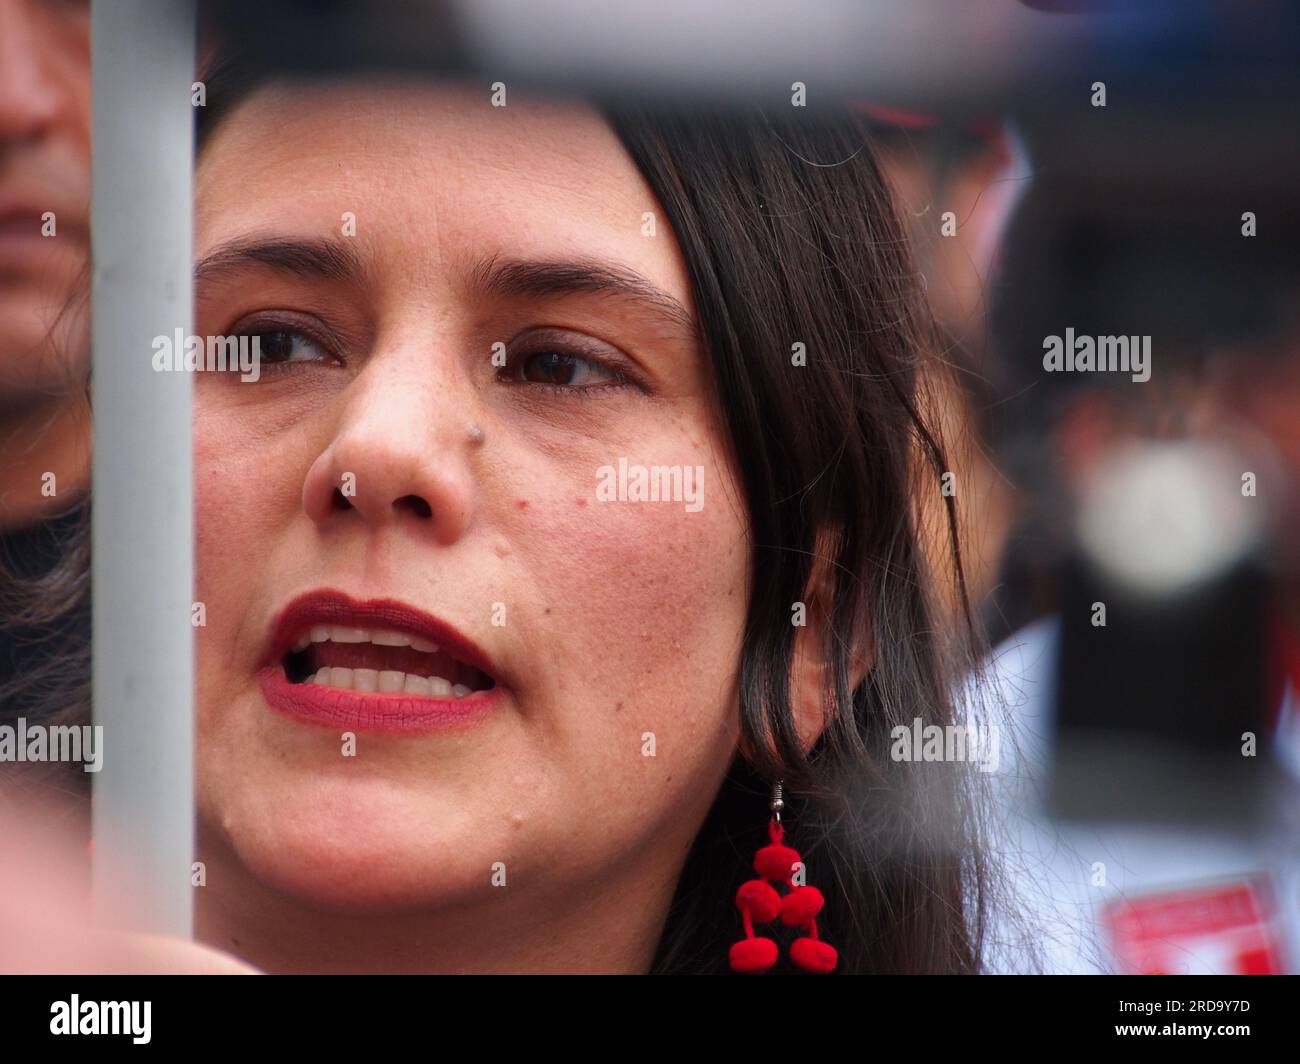 Veronika Mendoza Frisch, a Peruvian-French politician, founder and current leader of the New Peru party, demonstrating when thousands of unionists, activists, and members of indigenous groups took to the streets as part of the so called Third Takeover of Lima, to start another wave of protests against the President Dina Boluarte and the Congress, asking for her resignation and new general elections. In previous riots, from December 2022 to March of this year, there were more than 50 deaths due to the use of excessive force by the police to control the protesters. Stock Photo